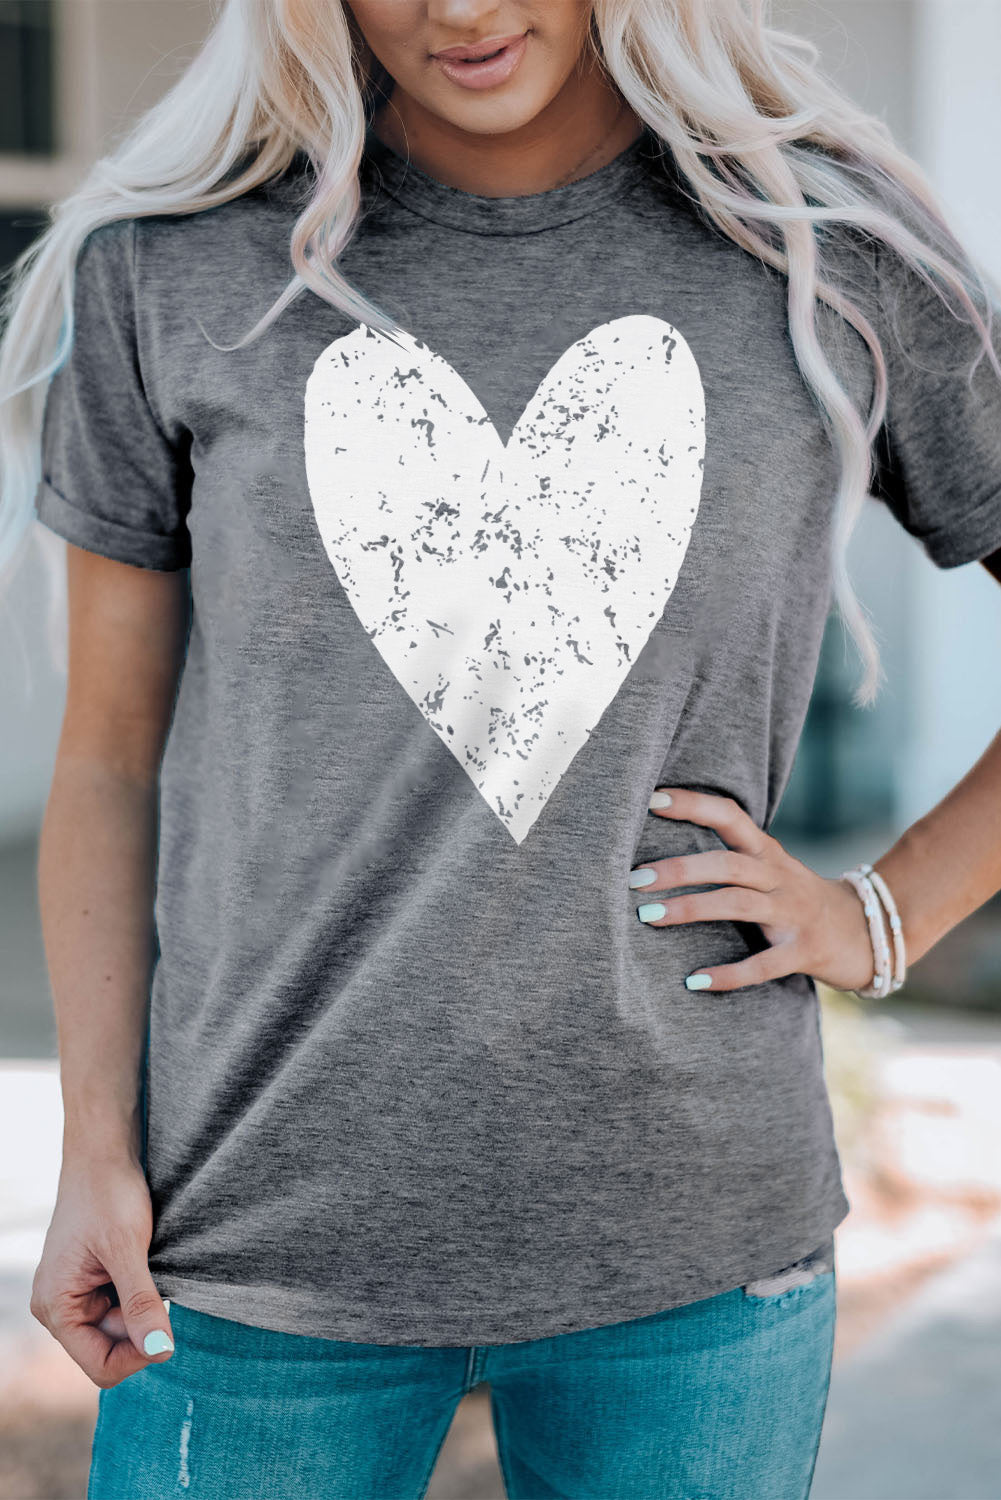 Heart Graphic Cuffed Short Sleeve Tee - Kawaii Stop - Casual Chic, Comfortable, Everyday Wear, Graphic Tee, Heart Design, Ship From Overseas, Short Sleeve, Stretchy Material, Stylish, SYNZ, T-Shirt, T-Shirts, Tee, Trendy Look, Wardrobe Essential, Women's Clothing, Women's Top